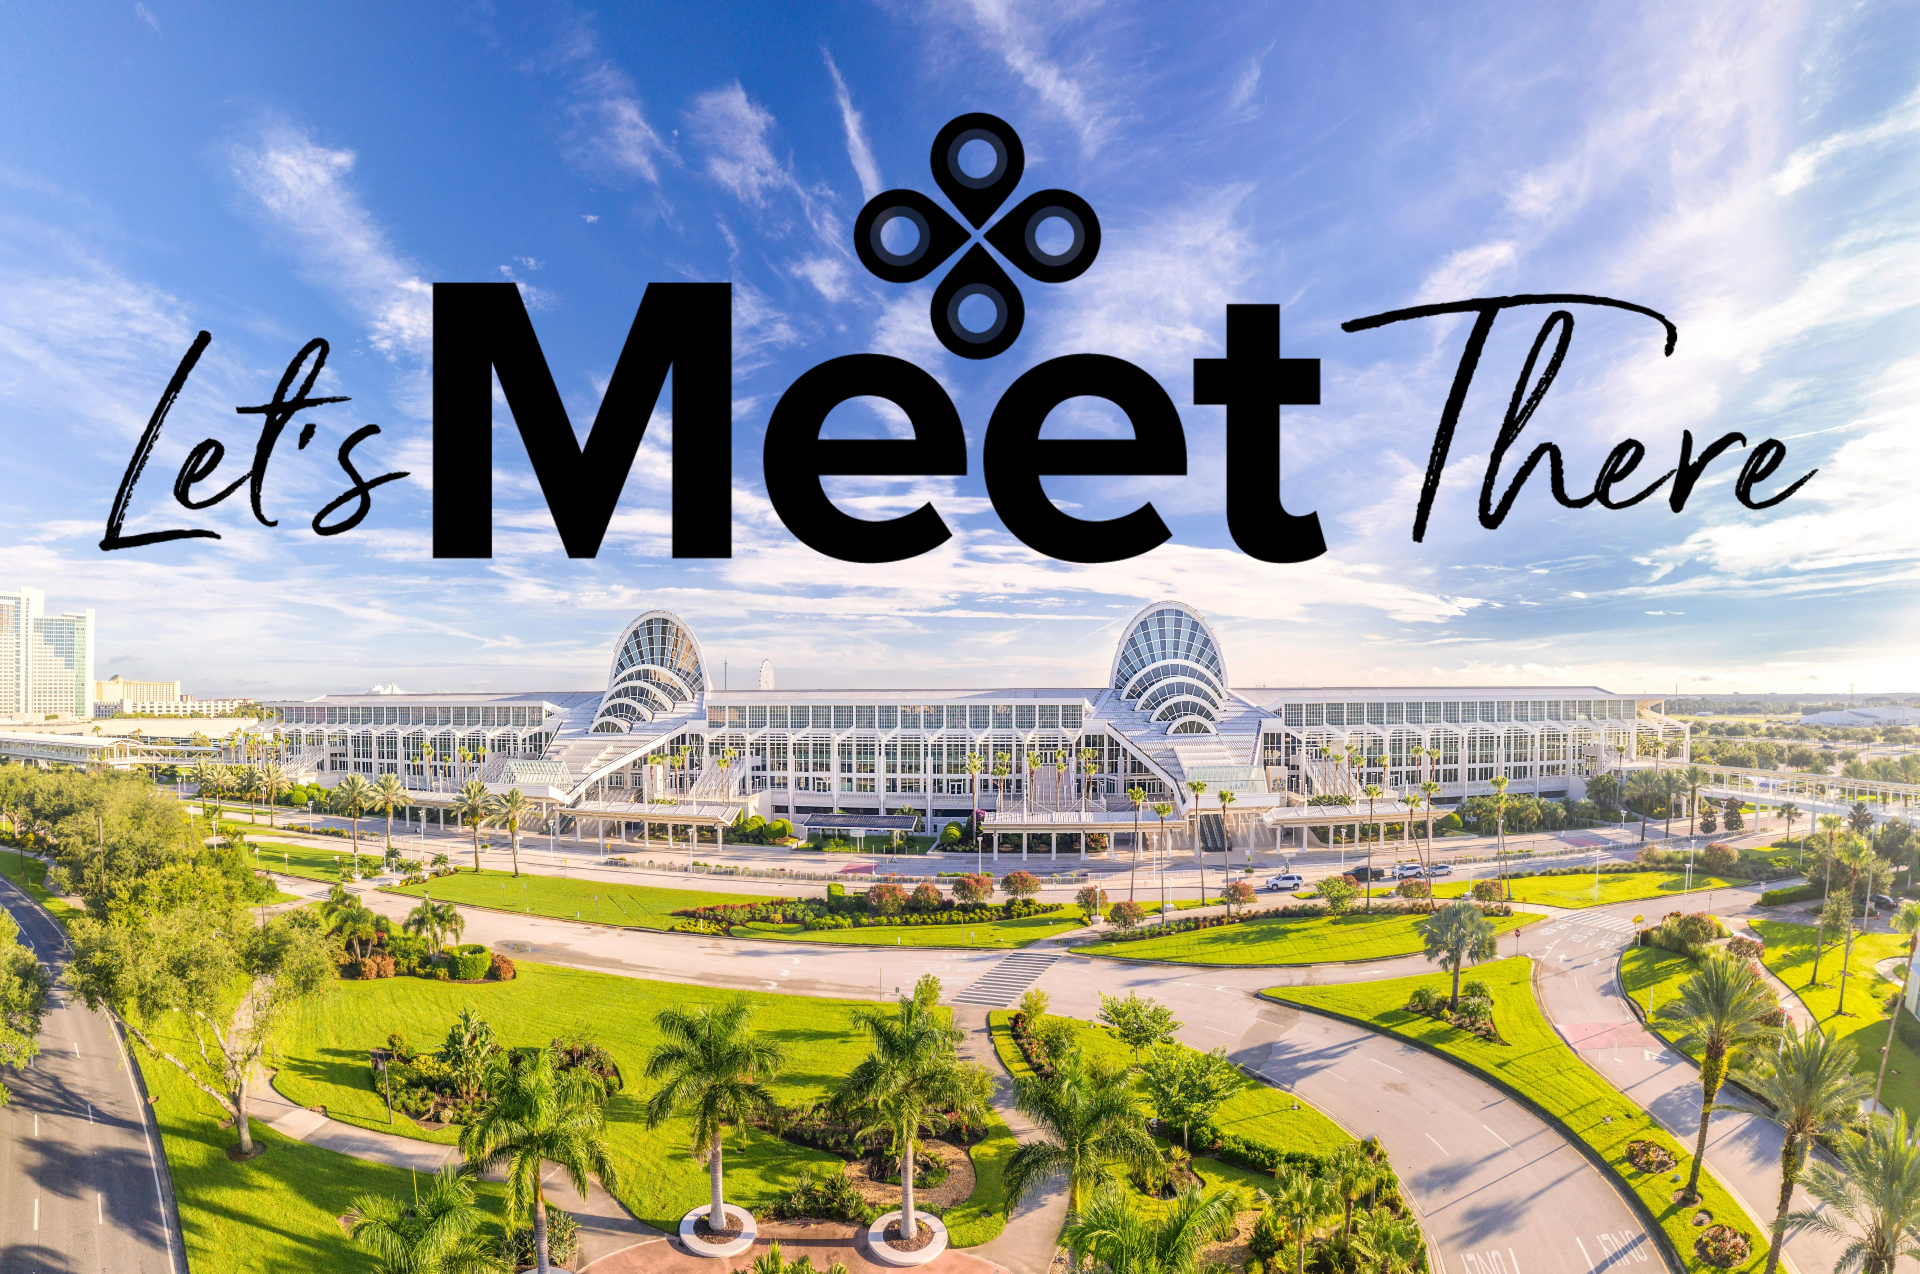 Visit Orlando promotes U.S. Travel Association's Let's Meet There campaign